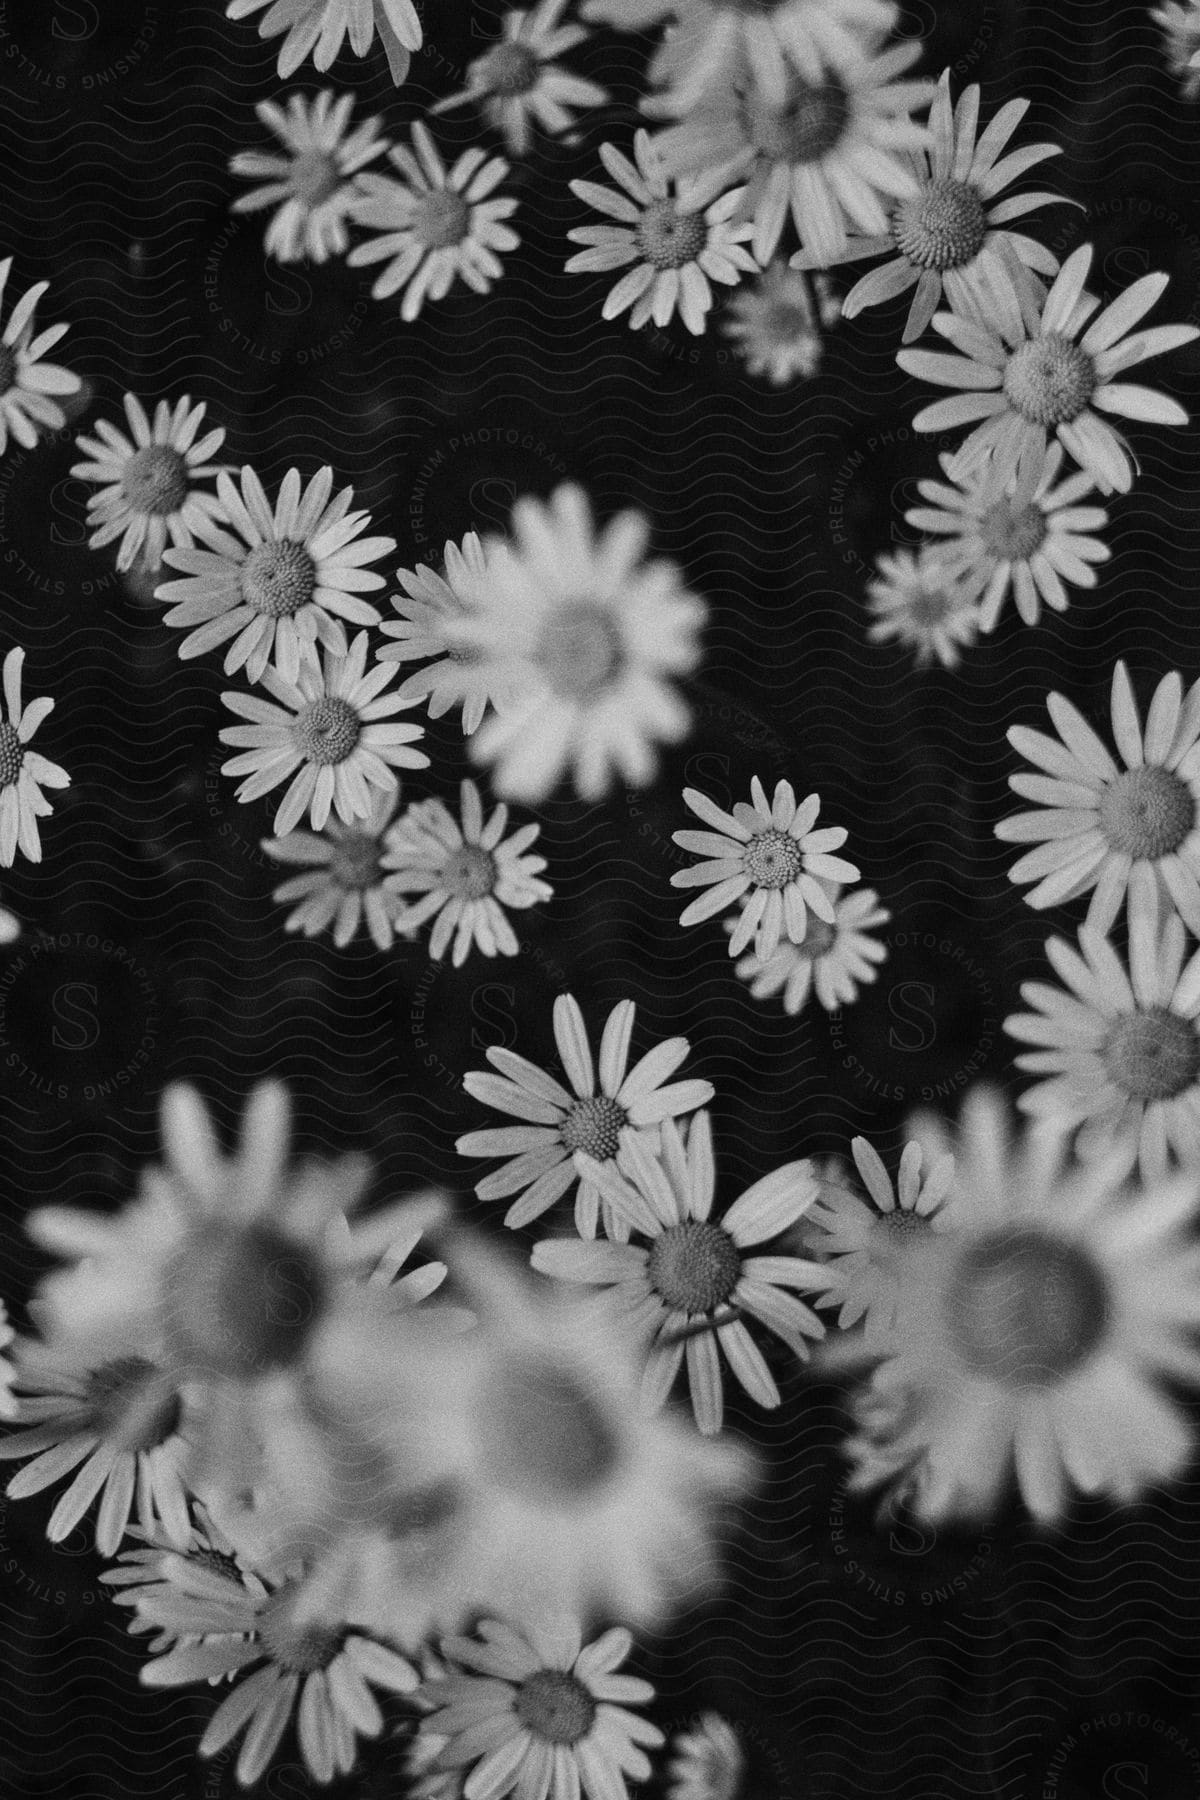 A cascade of abstract daisies plummets against an infinite black abyss